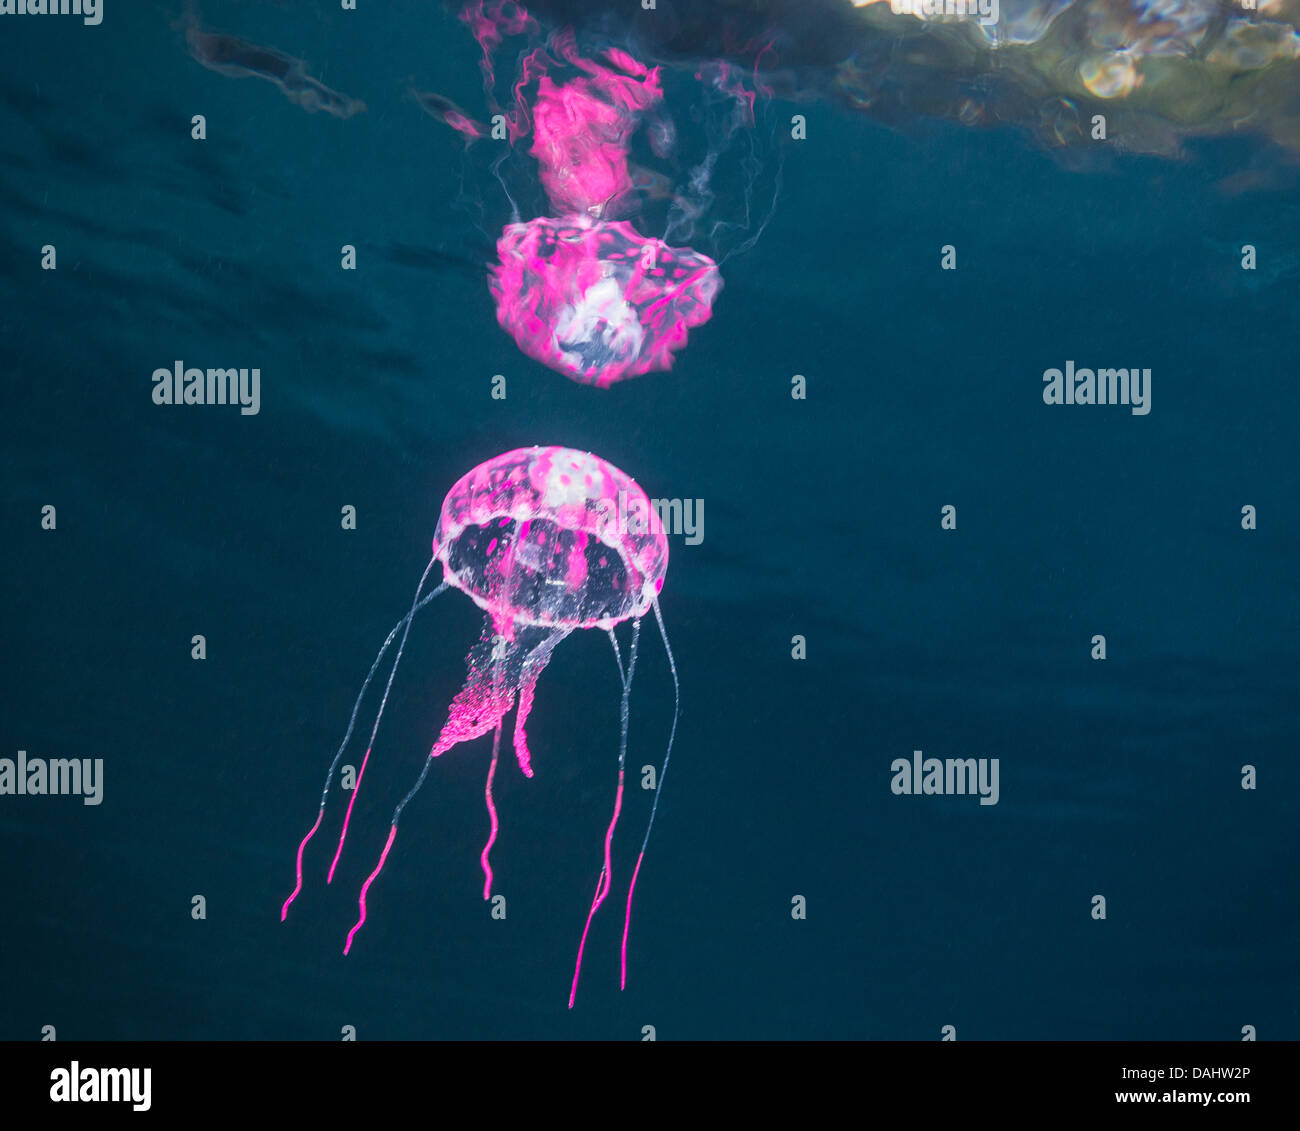 Prop jellyfish in a swimming pool Stock Photo